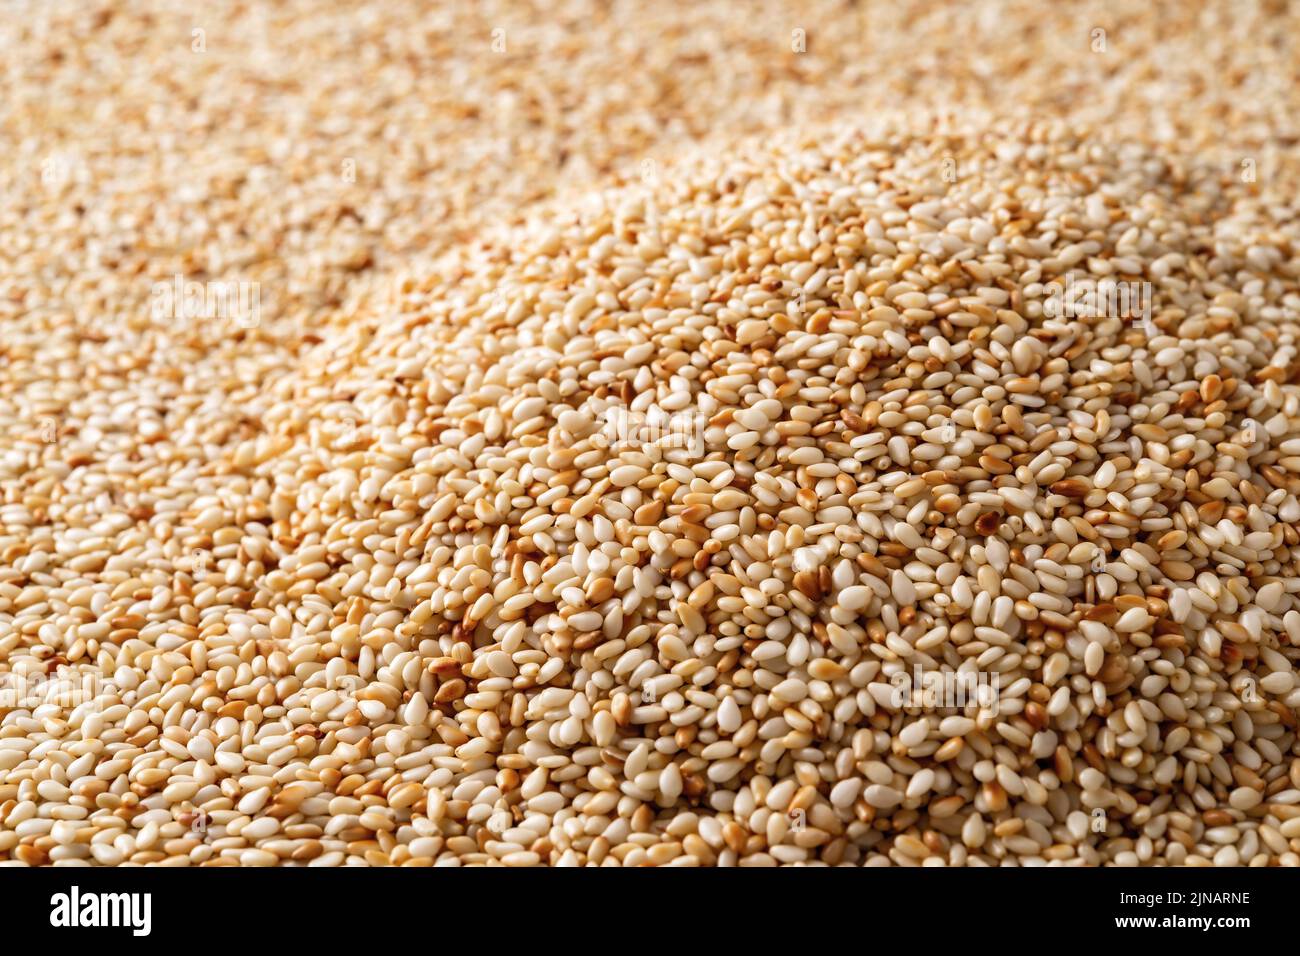 Heap of toasted sesame seeds macro texture. Pile of roasted Sesamum indicum background. White til as asian cuisine ingredient. Organic benne seeds. Stock Photo